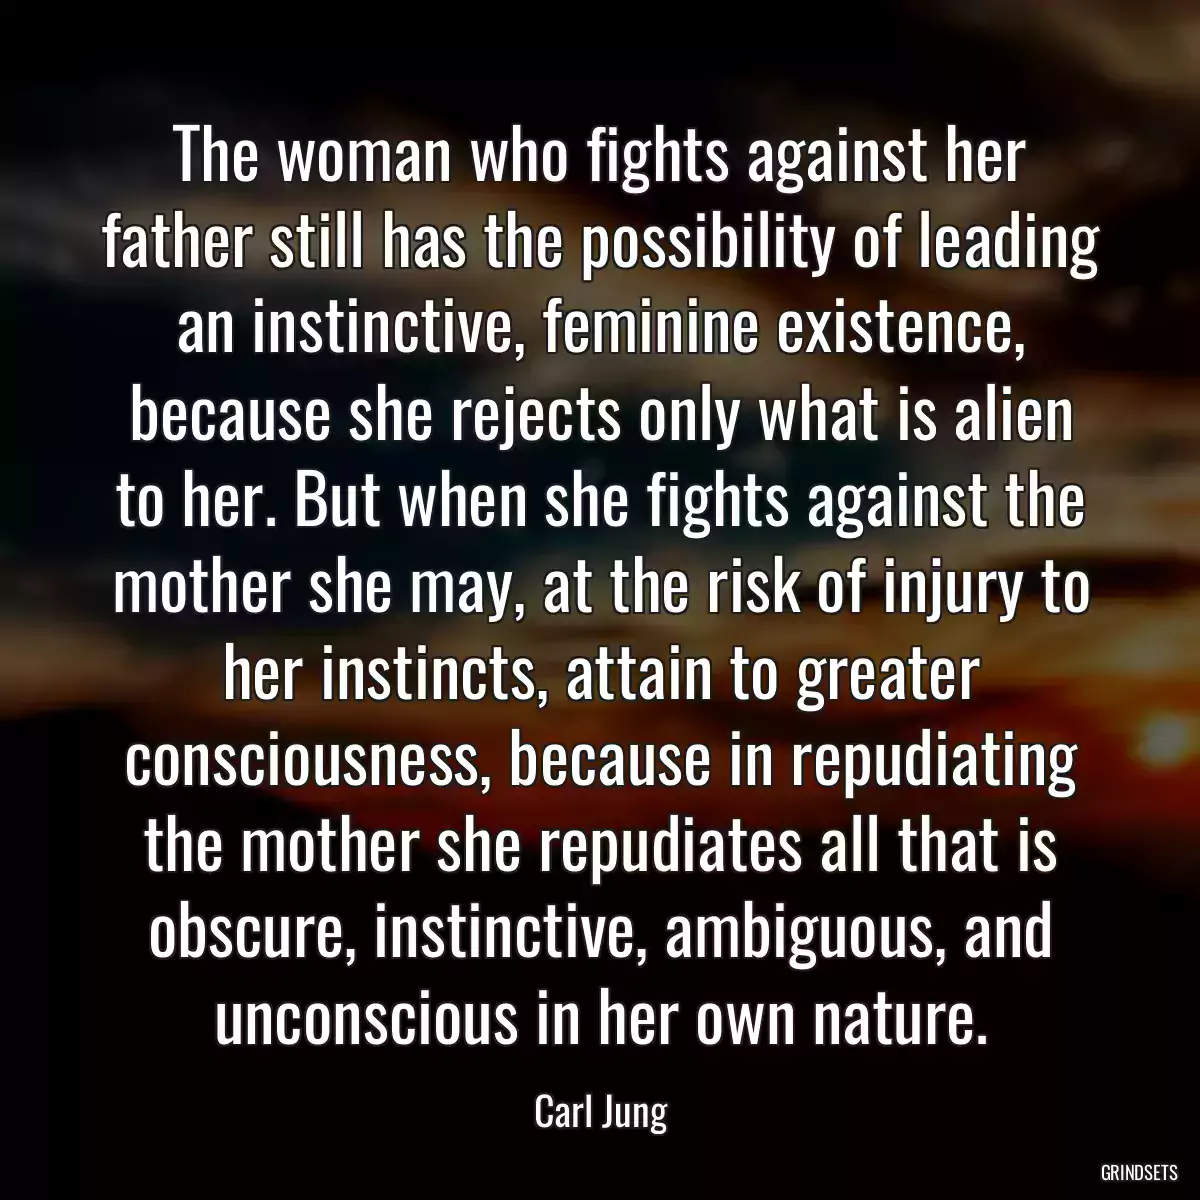 The woman who fights against her father still has the possibility of leading an instinctive, feminine existence, because she rejects only what is alien to her. But when she fights against the mother she may, at the risk of injury to her instincts, attain to greater consciousness, because in repudiating the mother she repudiates all that is obscure, instinctive, ambiguous, and unconscious in her own nature.